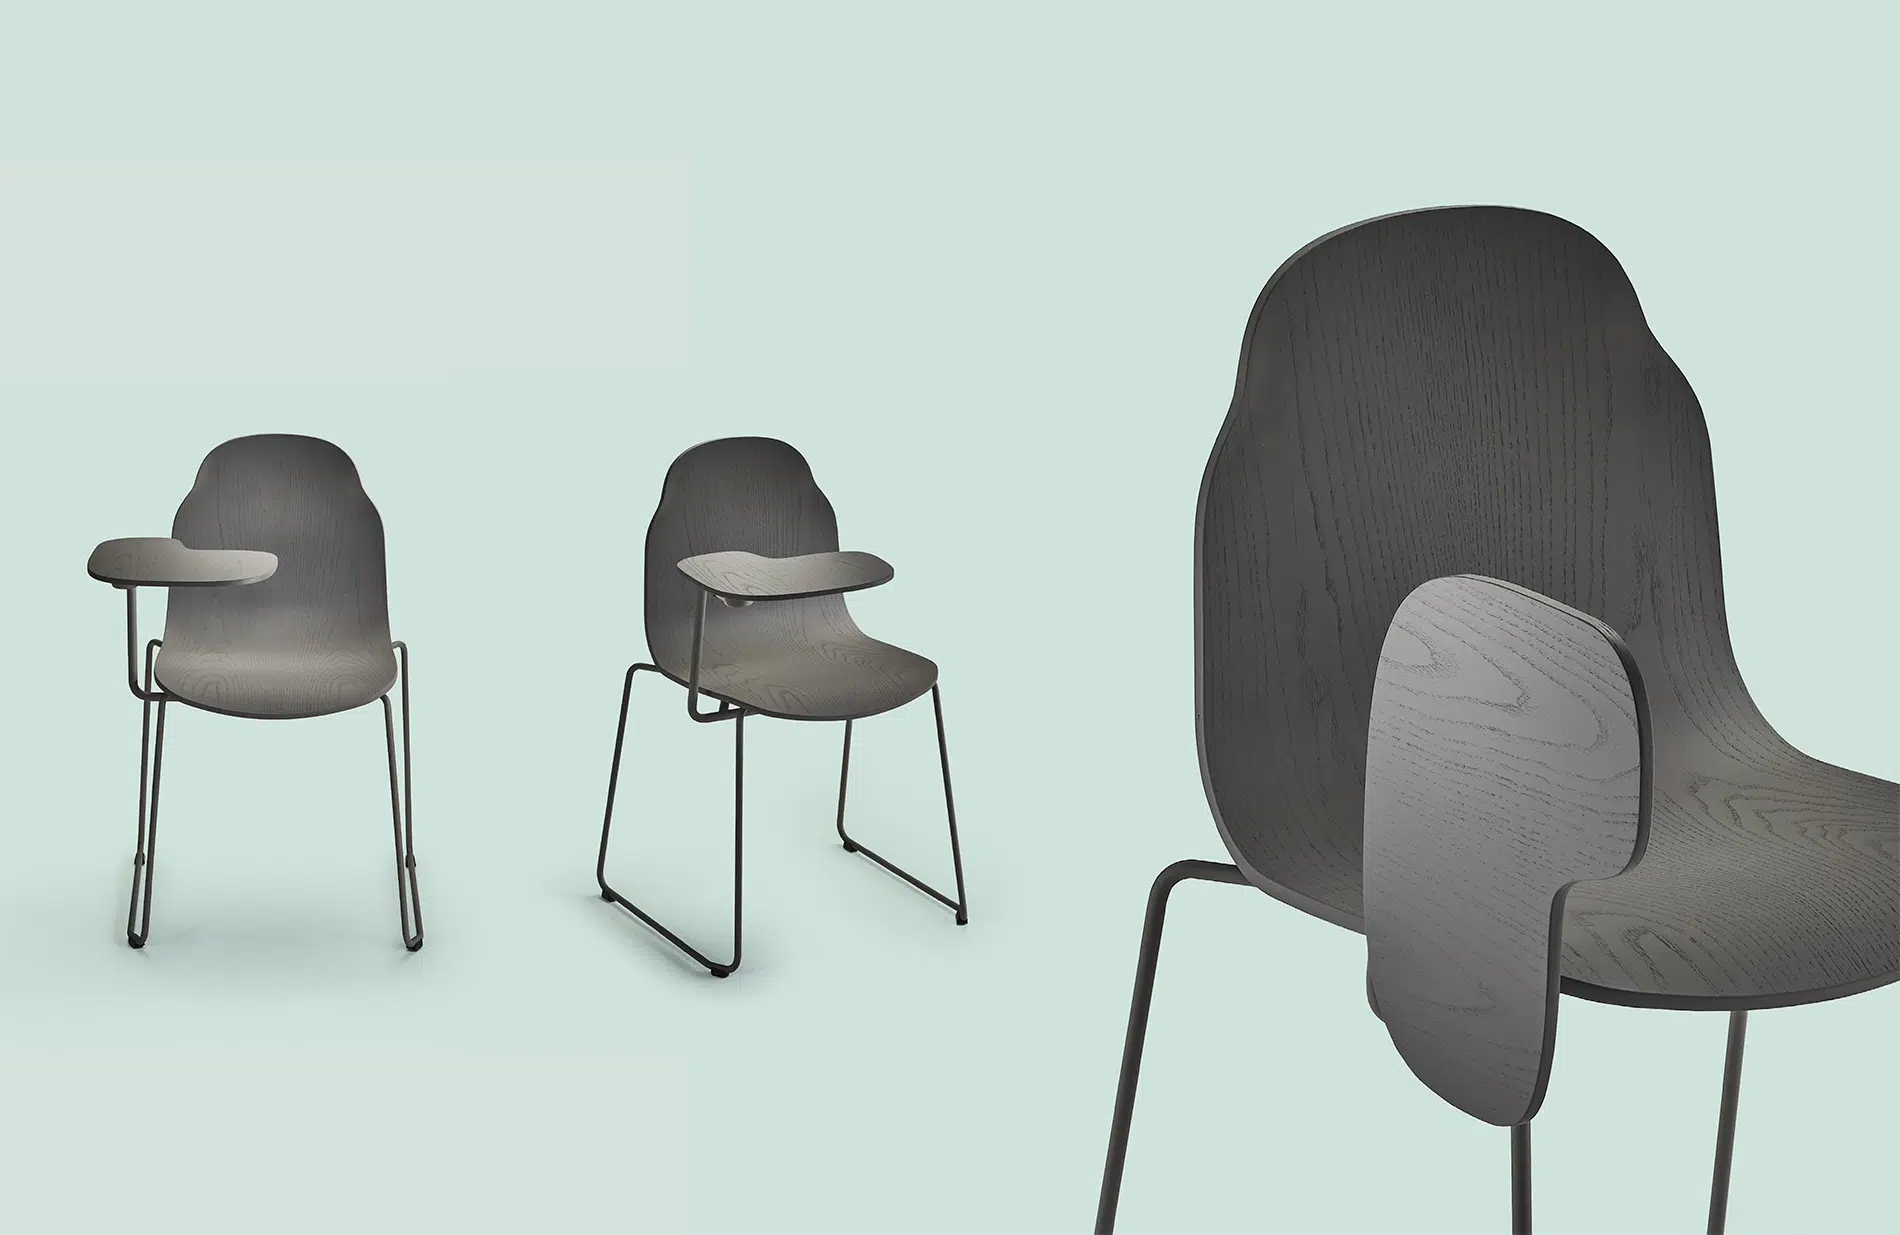 Body, a chair for many environments.